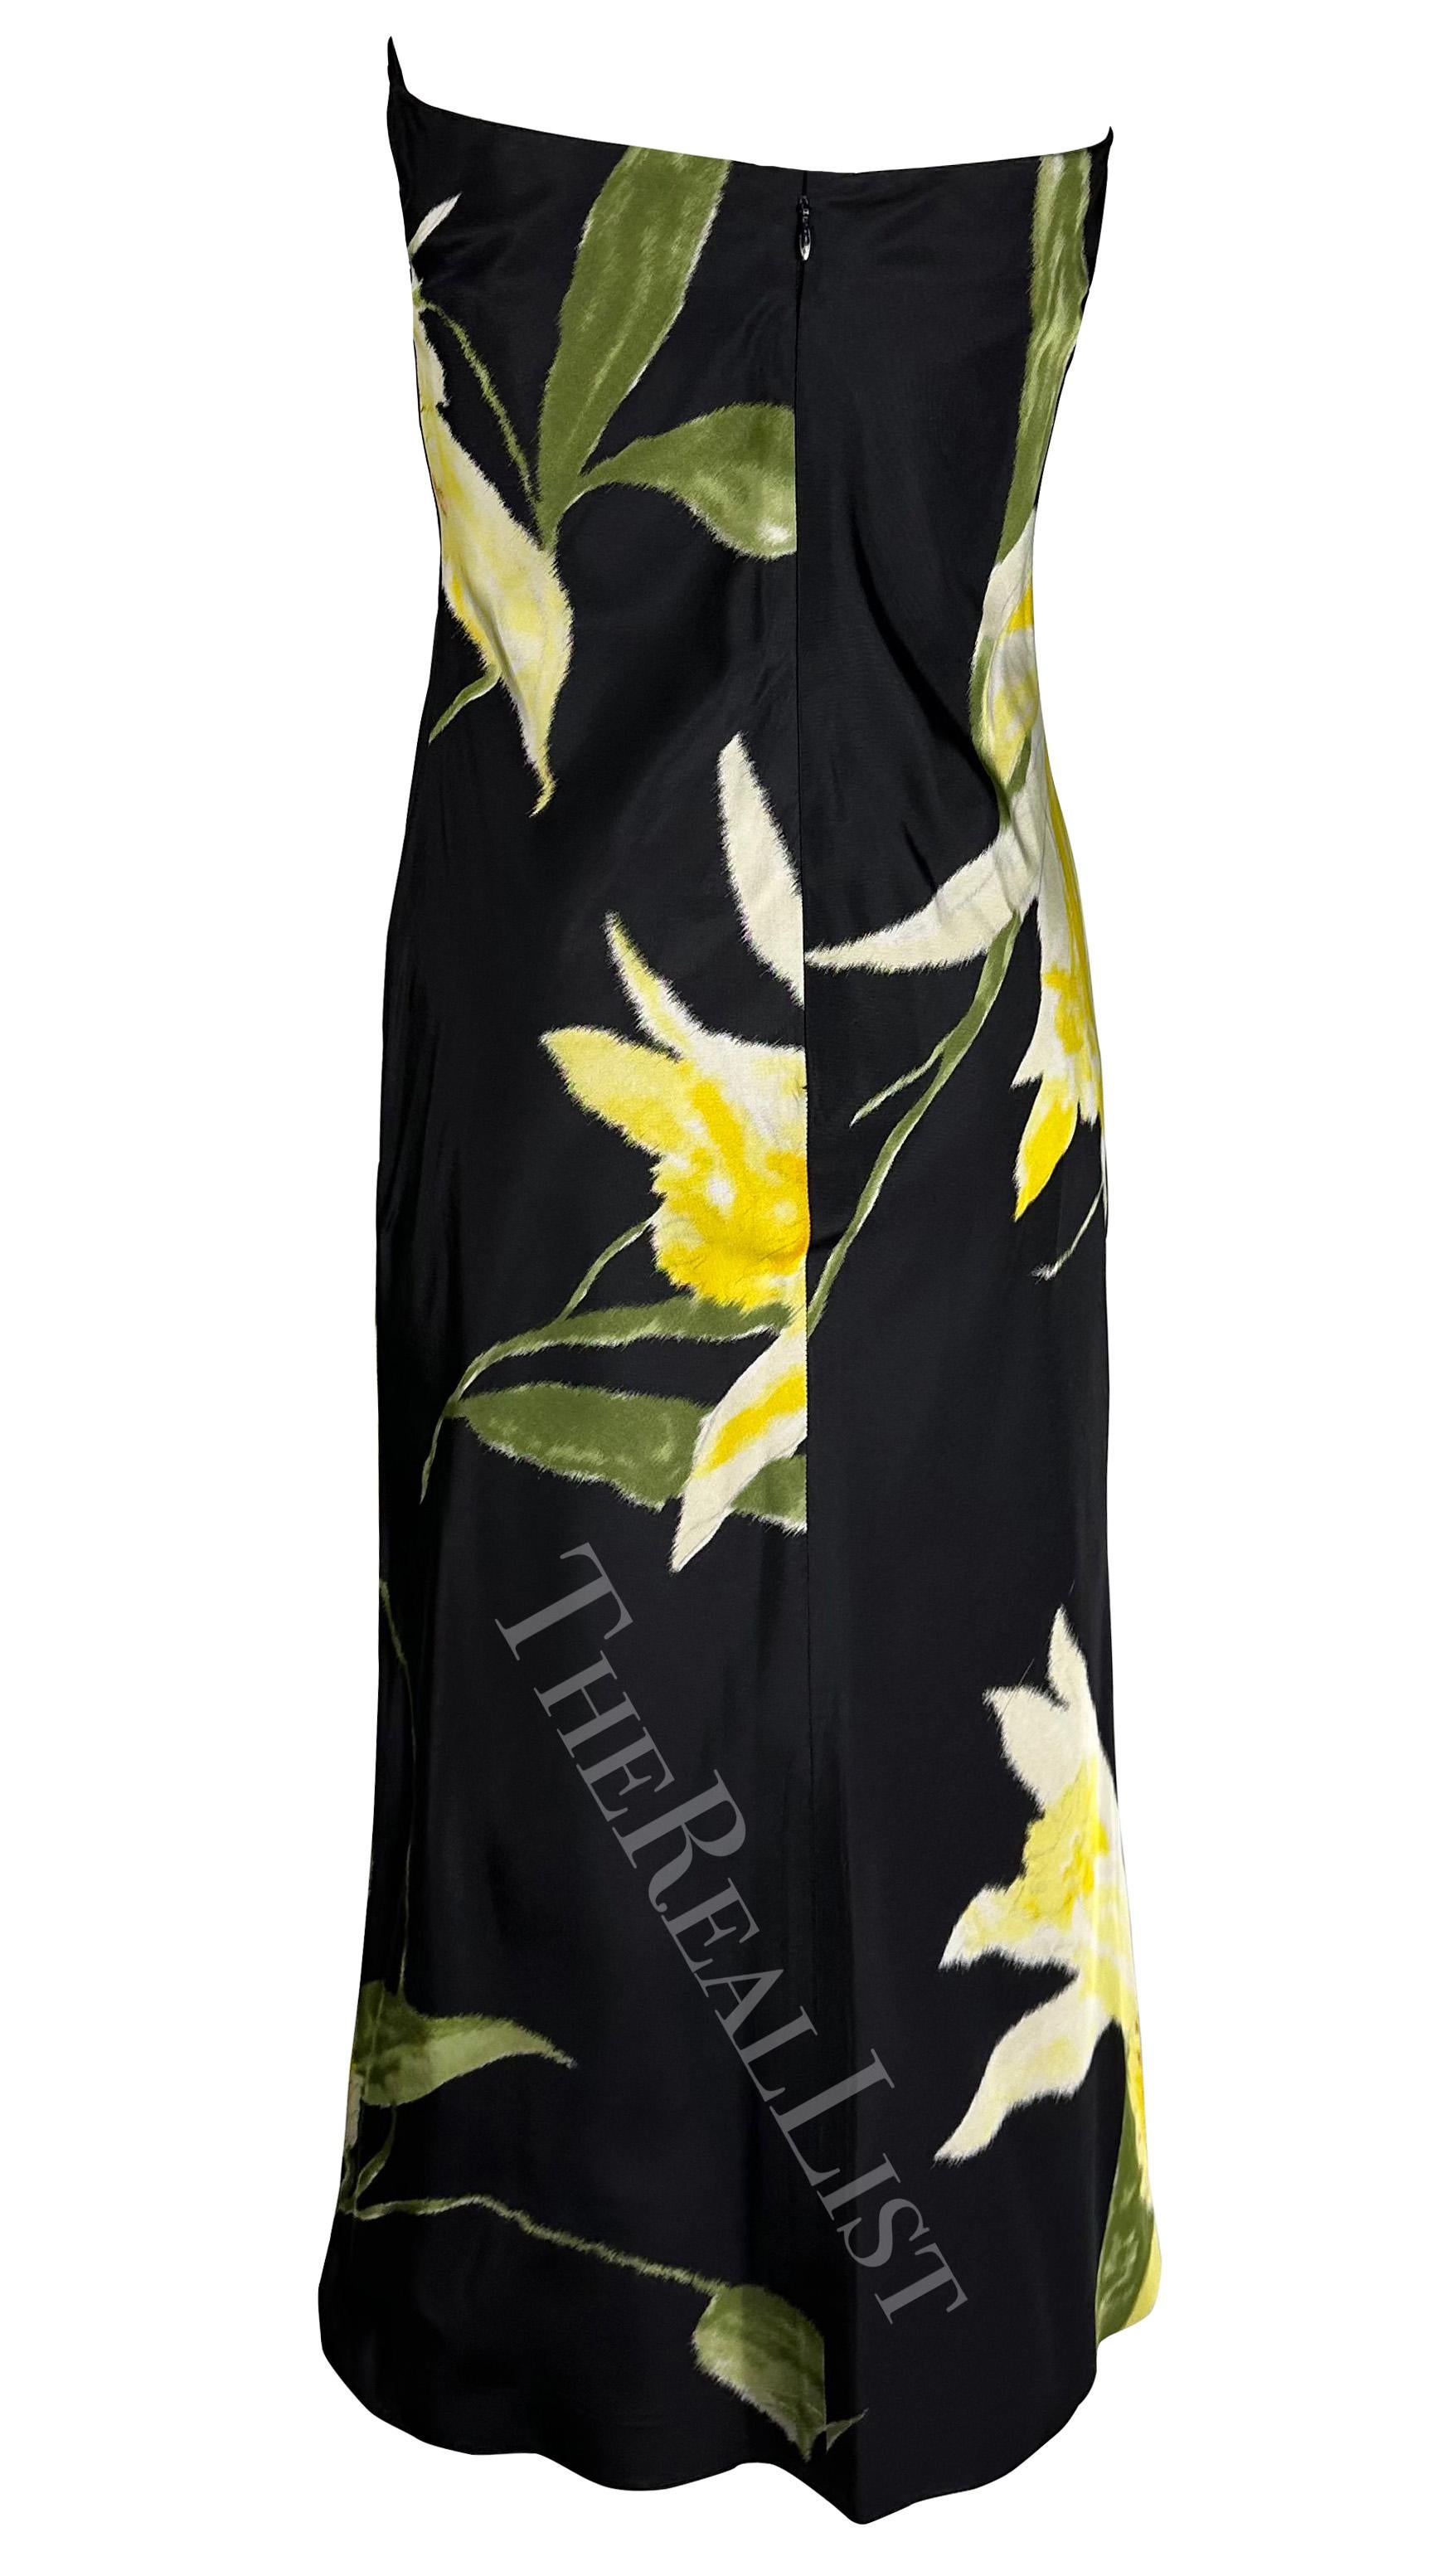 S/S 2000 Ralph Lauren Runway Black Yellow Floral Strapless Cocktail Dress For Sale 4